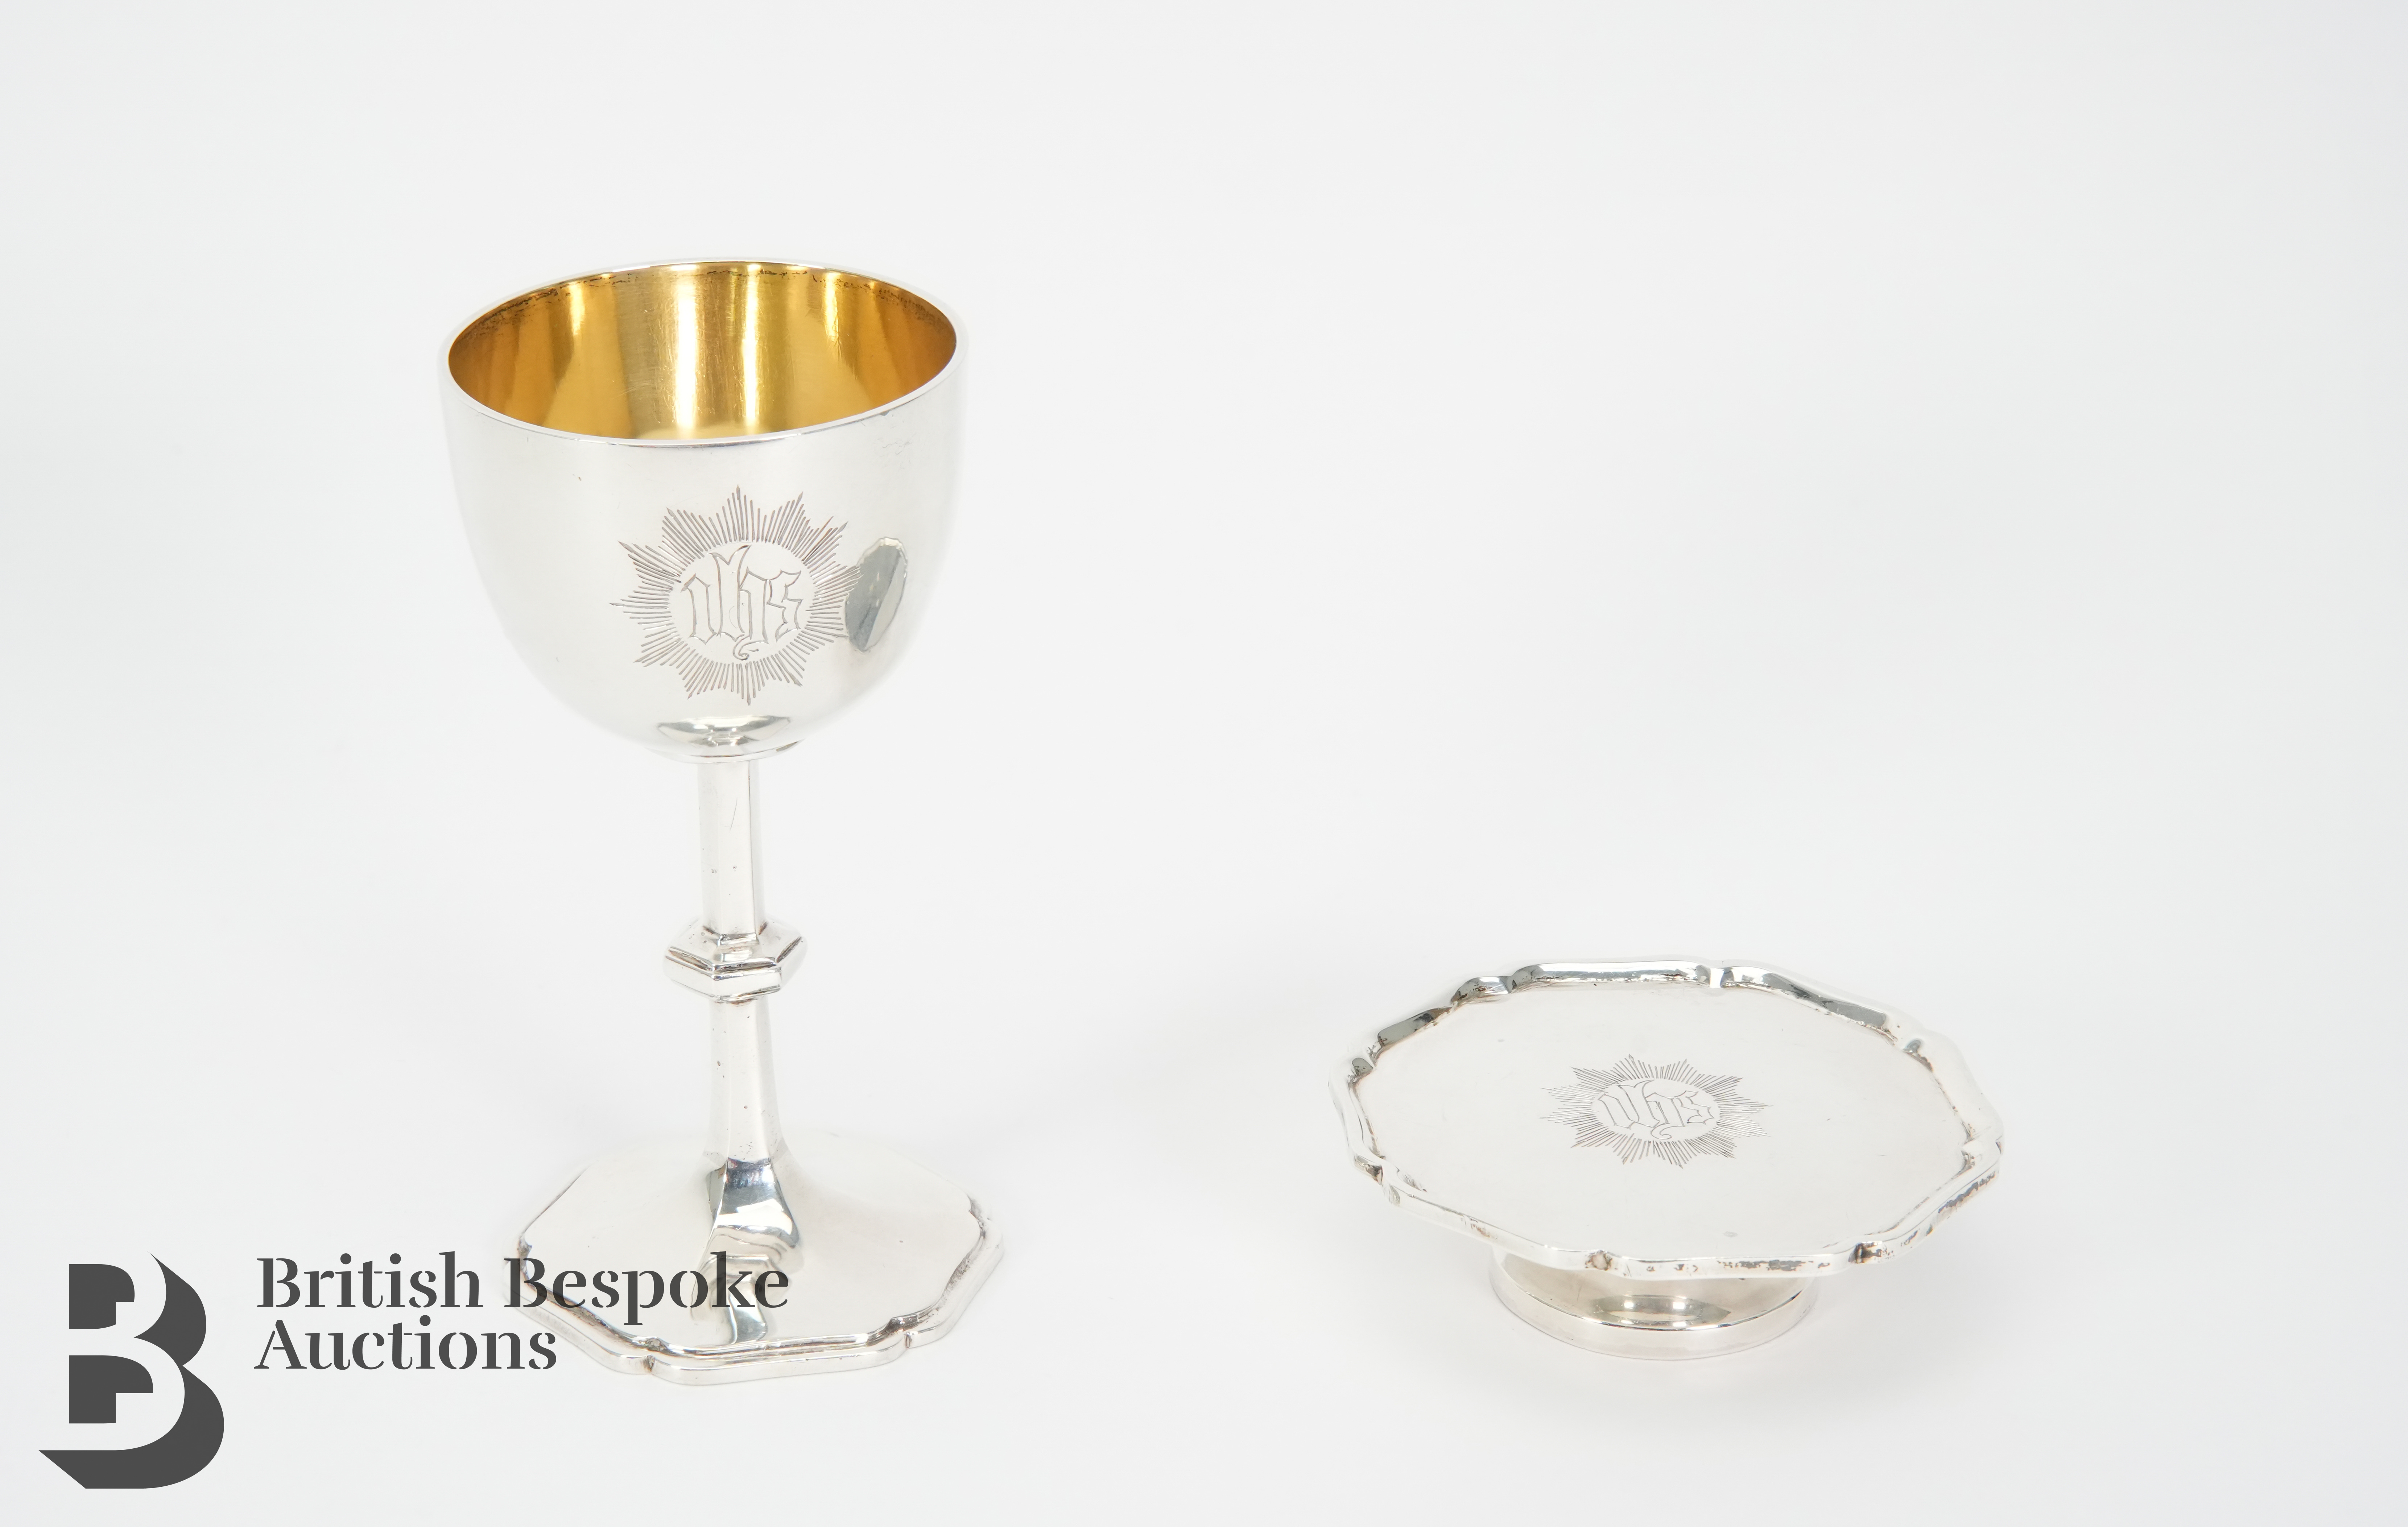 Silver Travelling Goblet and Paten